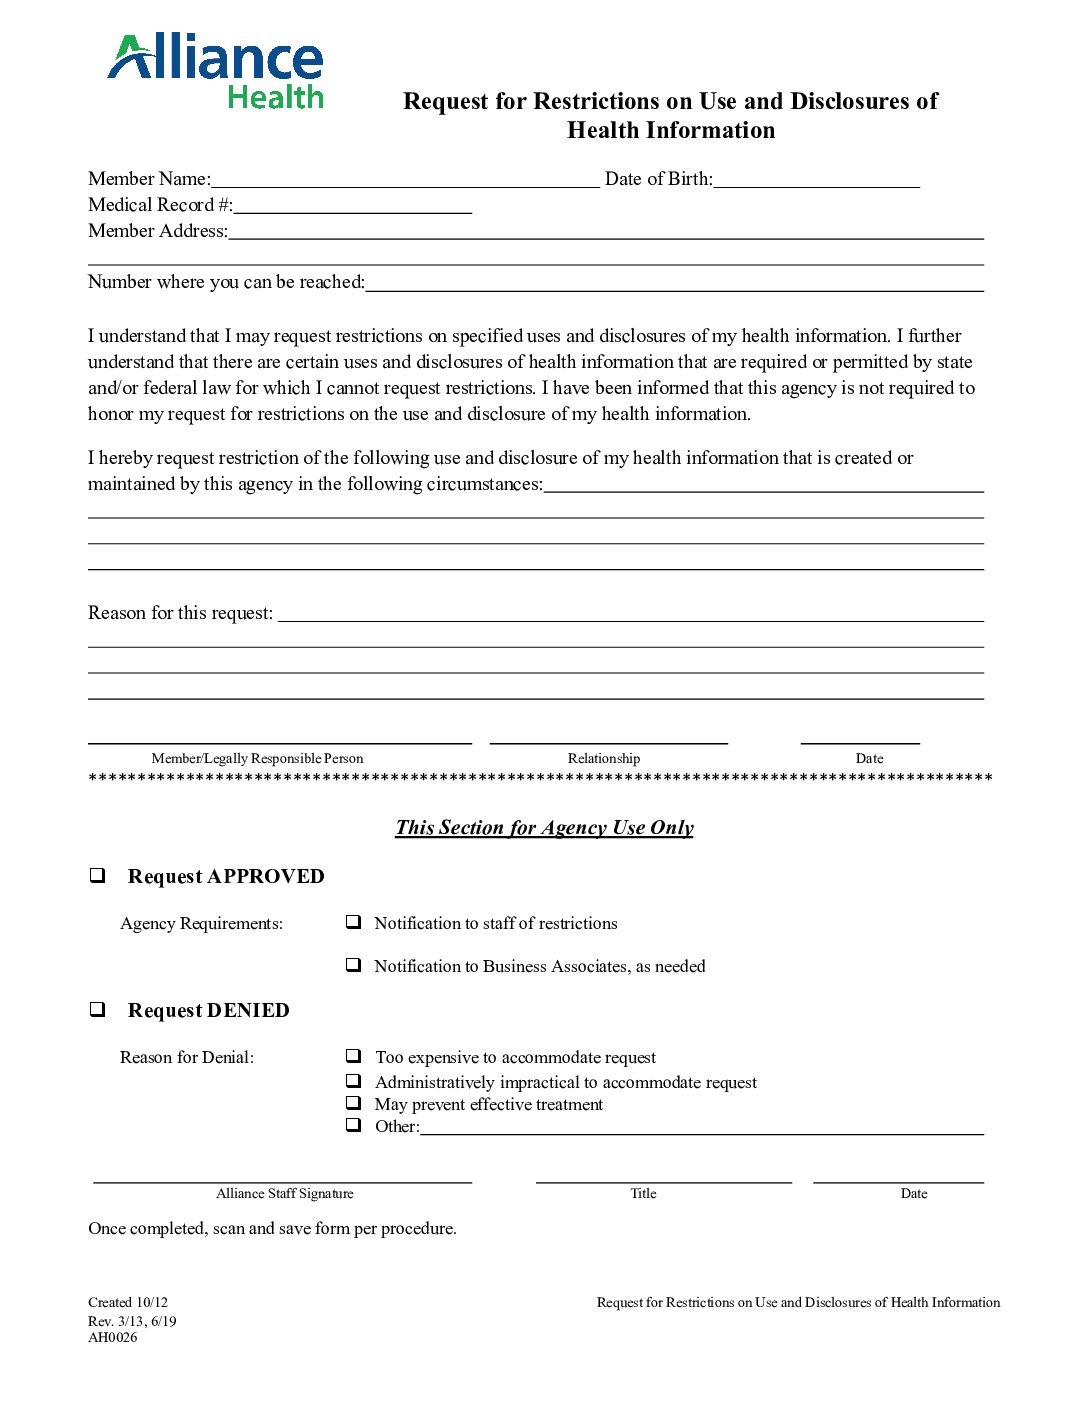 HIPAA Request for Restrictions on Use and Disclosure